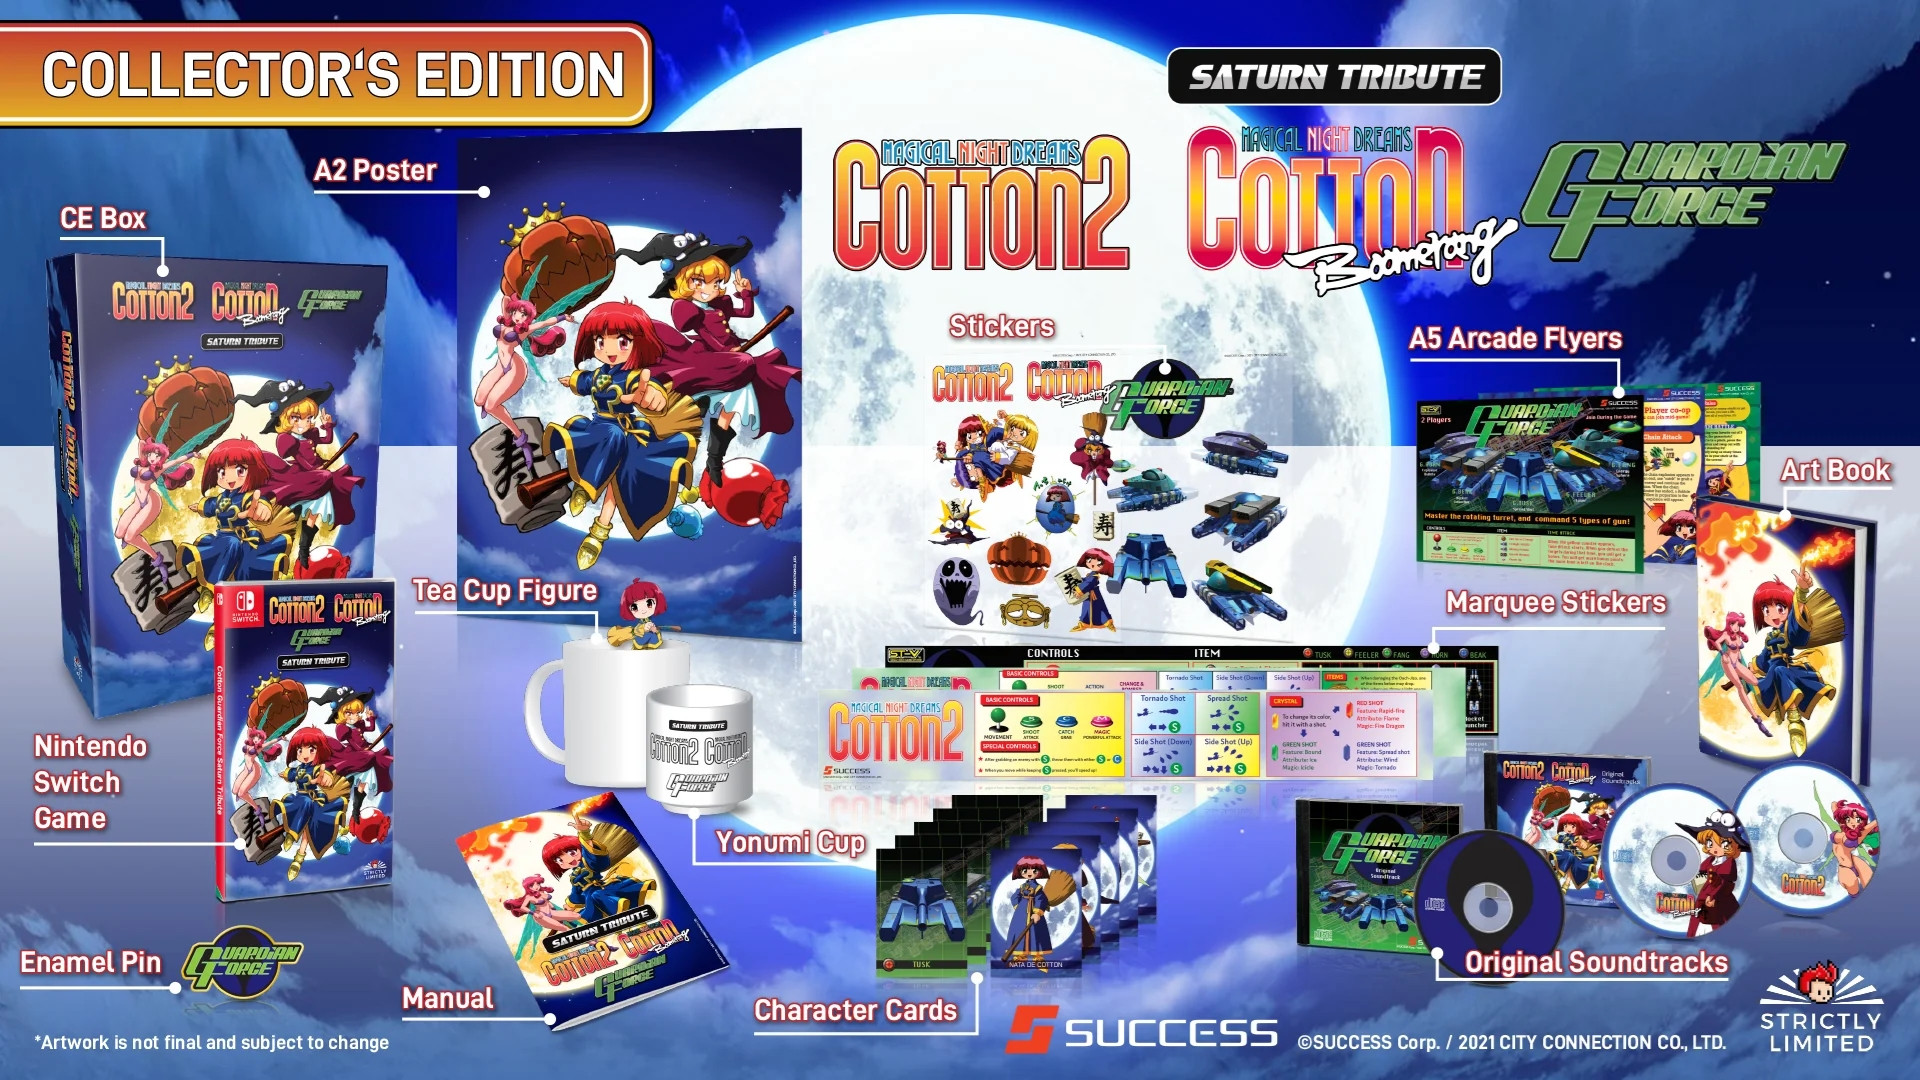 Cotton Guardian Force Saturn Tribute - Collector's Edition (Strictly Limited) (Switch), ININ Games, Strictly Limited Gamed